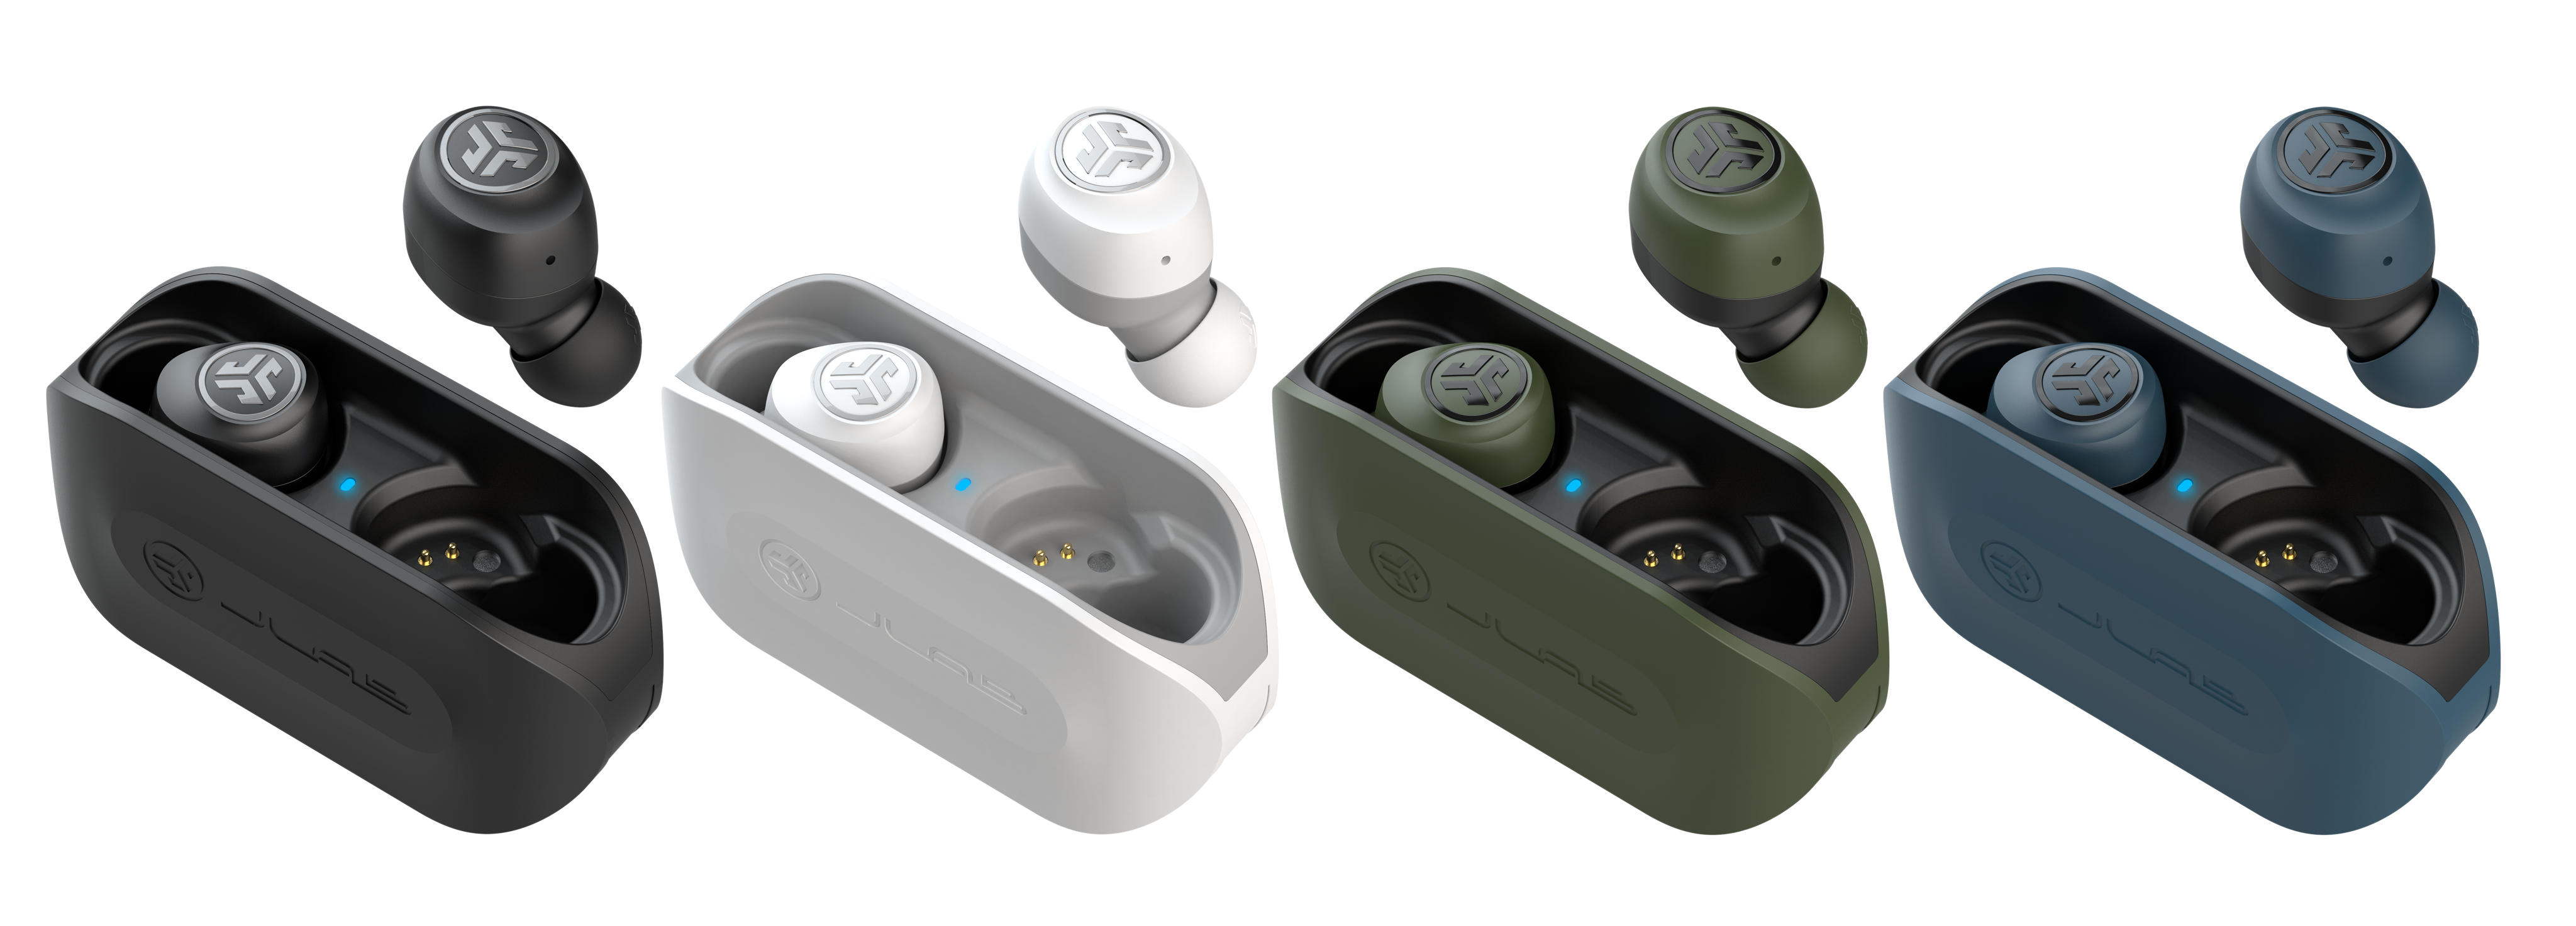 JLab GO Air True Wireless ($30) are available in four colors at select retailers in March. GO Air True Wireless Earbuds are the smallest fit ever from JLab's best-selling true wireless, 20% smaller than JBuds Air. Offering 20+ hours of total playtime and a wallet-friendly price, JLab GO Air features touch controls and dual connect, allowing the earbuds to be used independently.